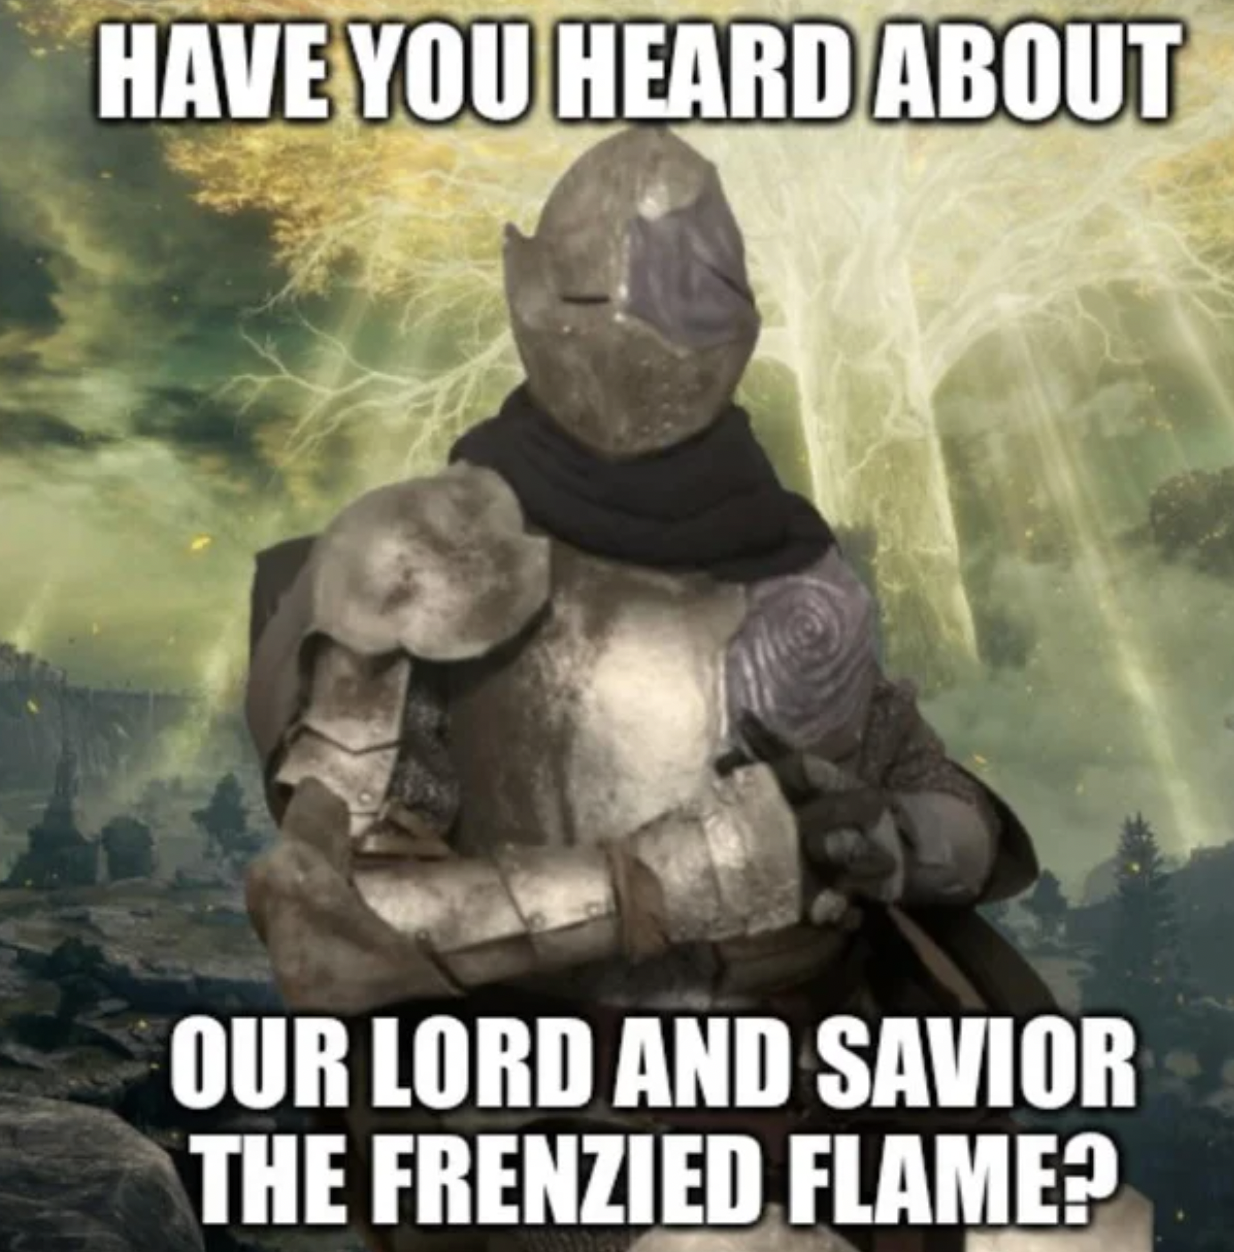 photo caption - Have You Heard About Our Lord And Savior The Frenzied Flame?